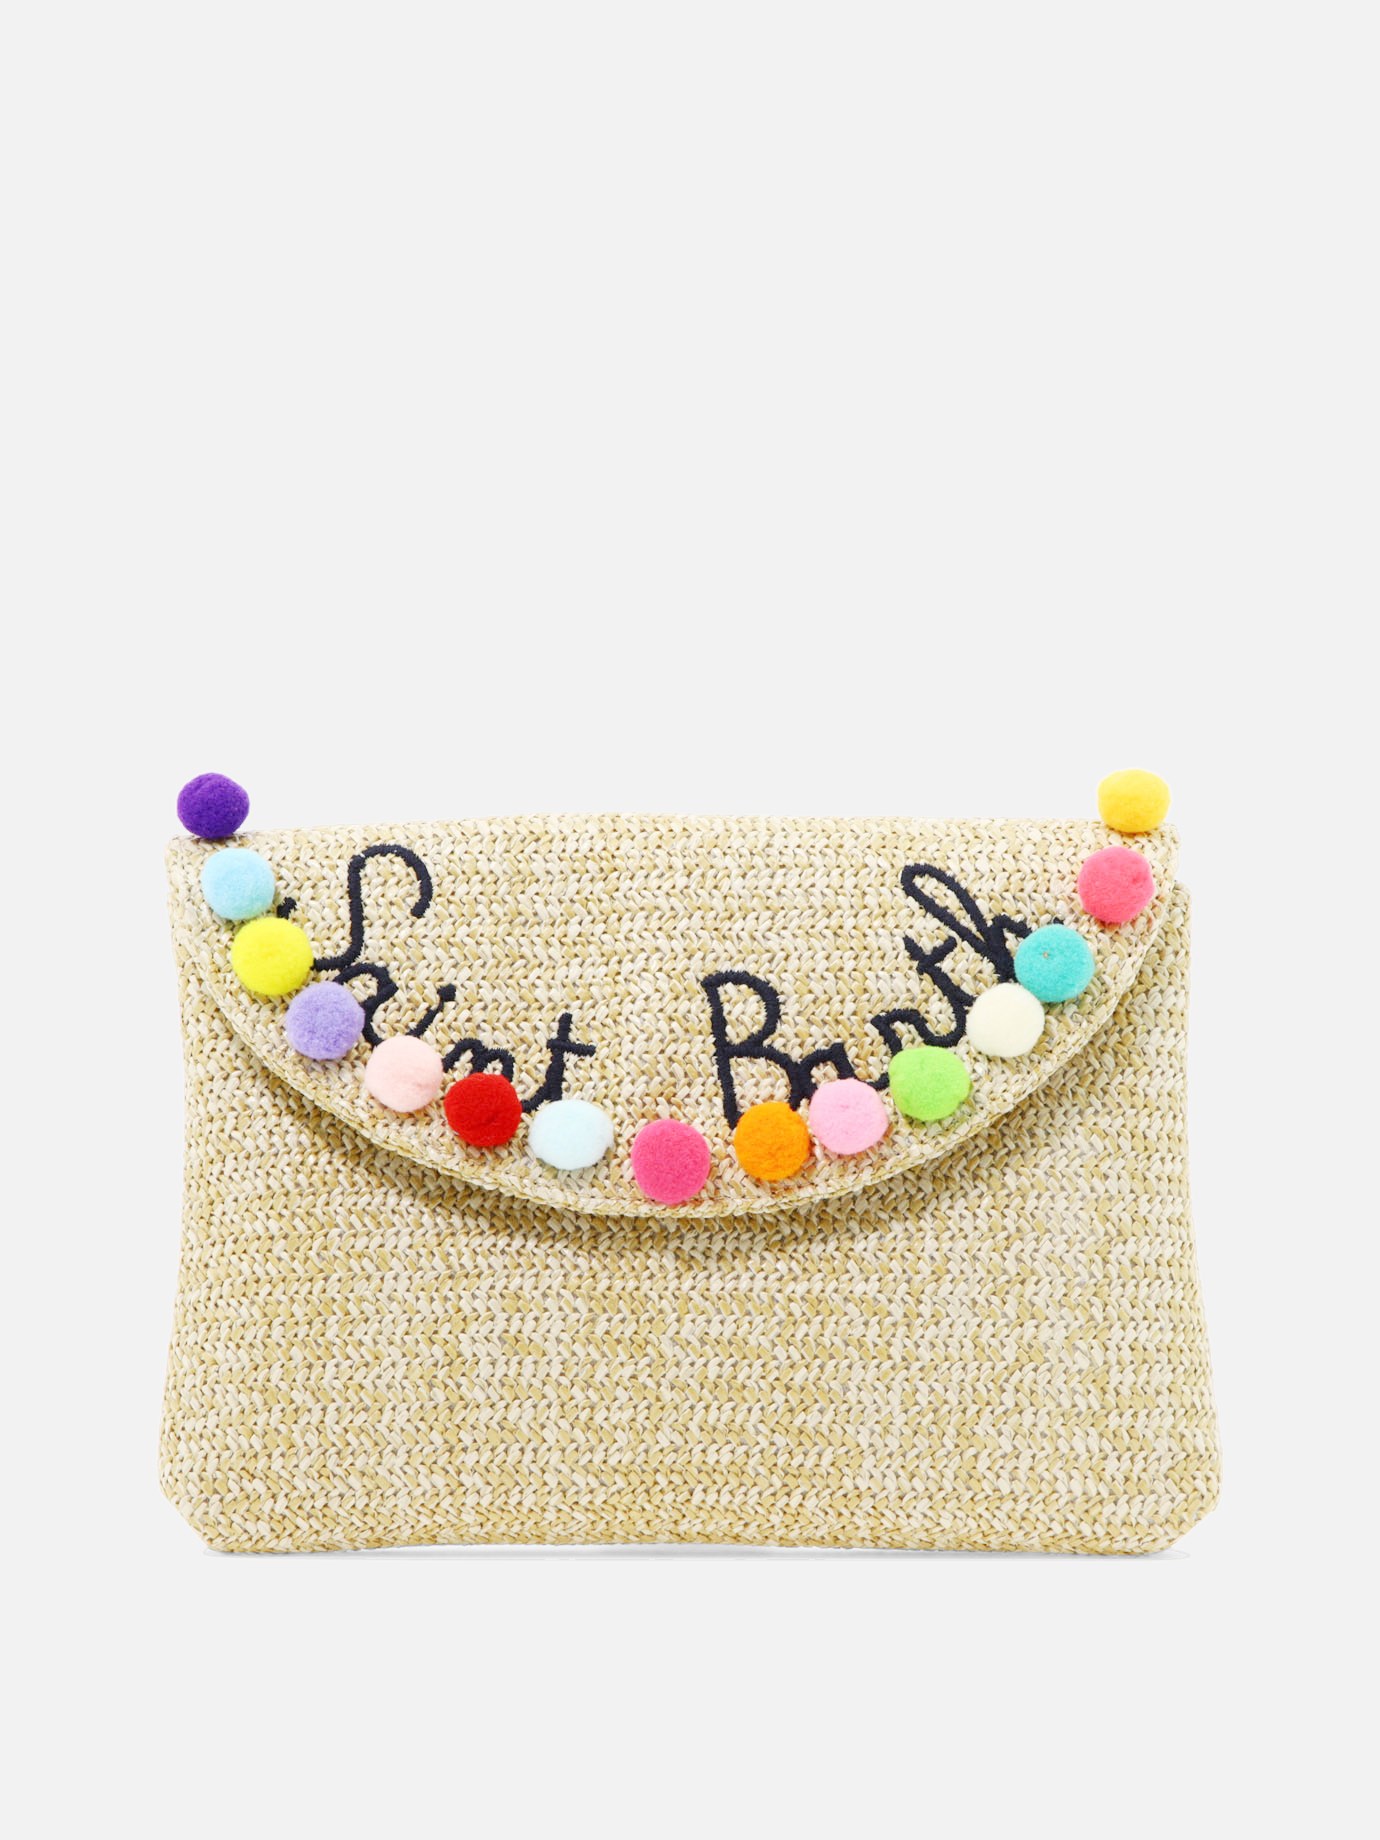 Straw clutch with embroidery